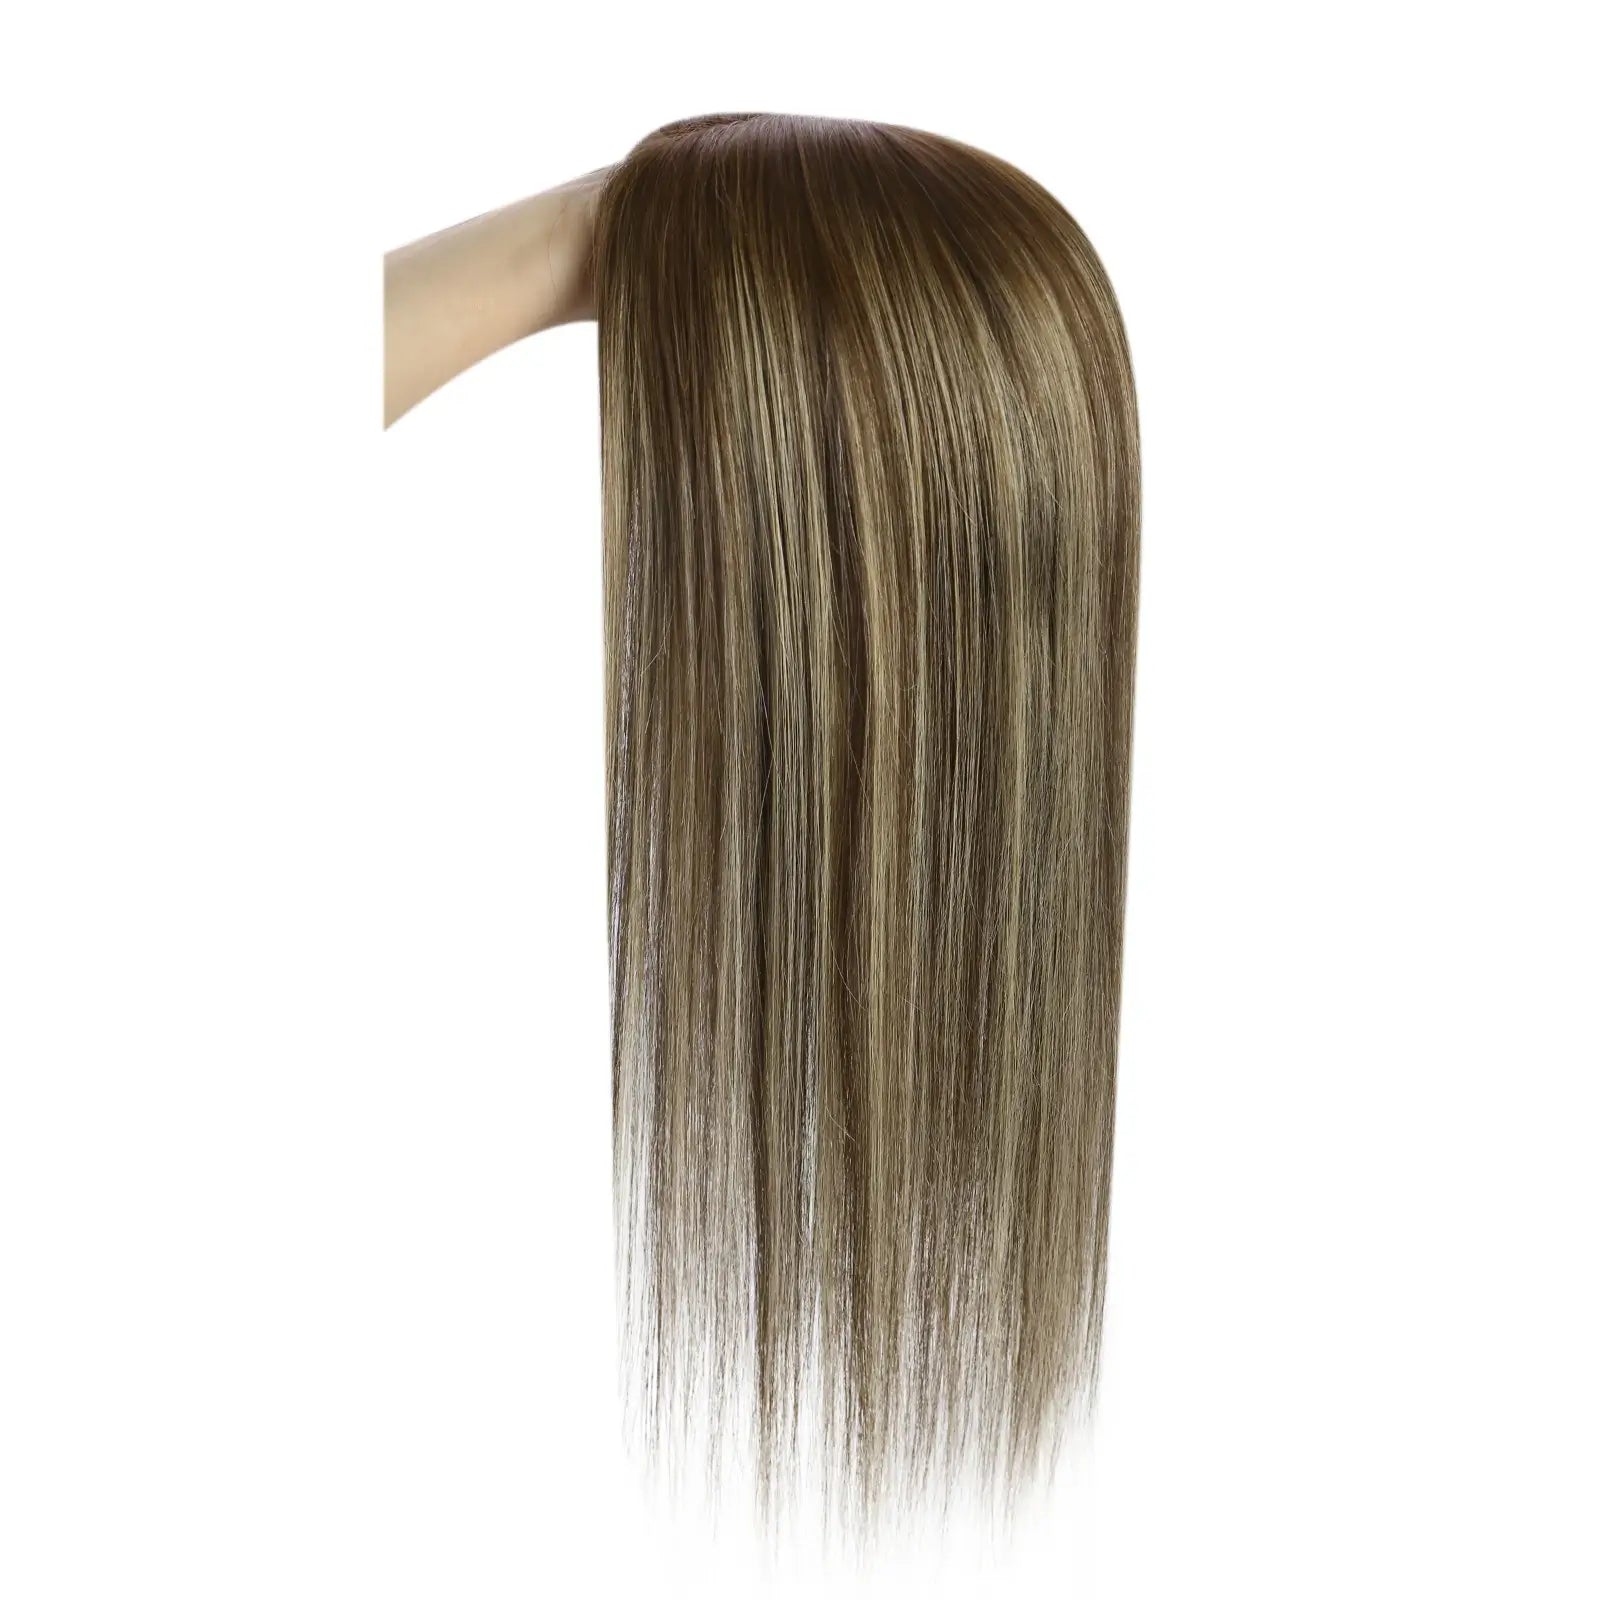 Balayage Ombre Brown Blonde Hair Clip On Human Hair Topper For women